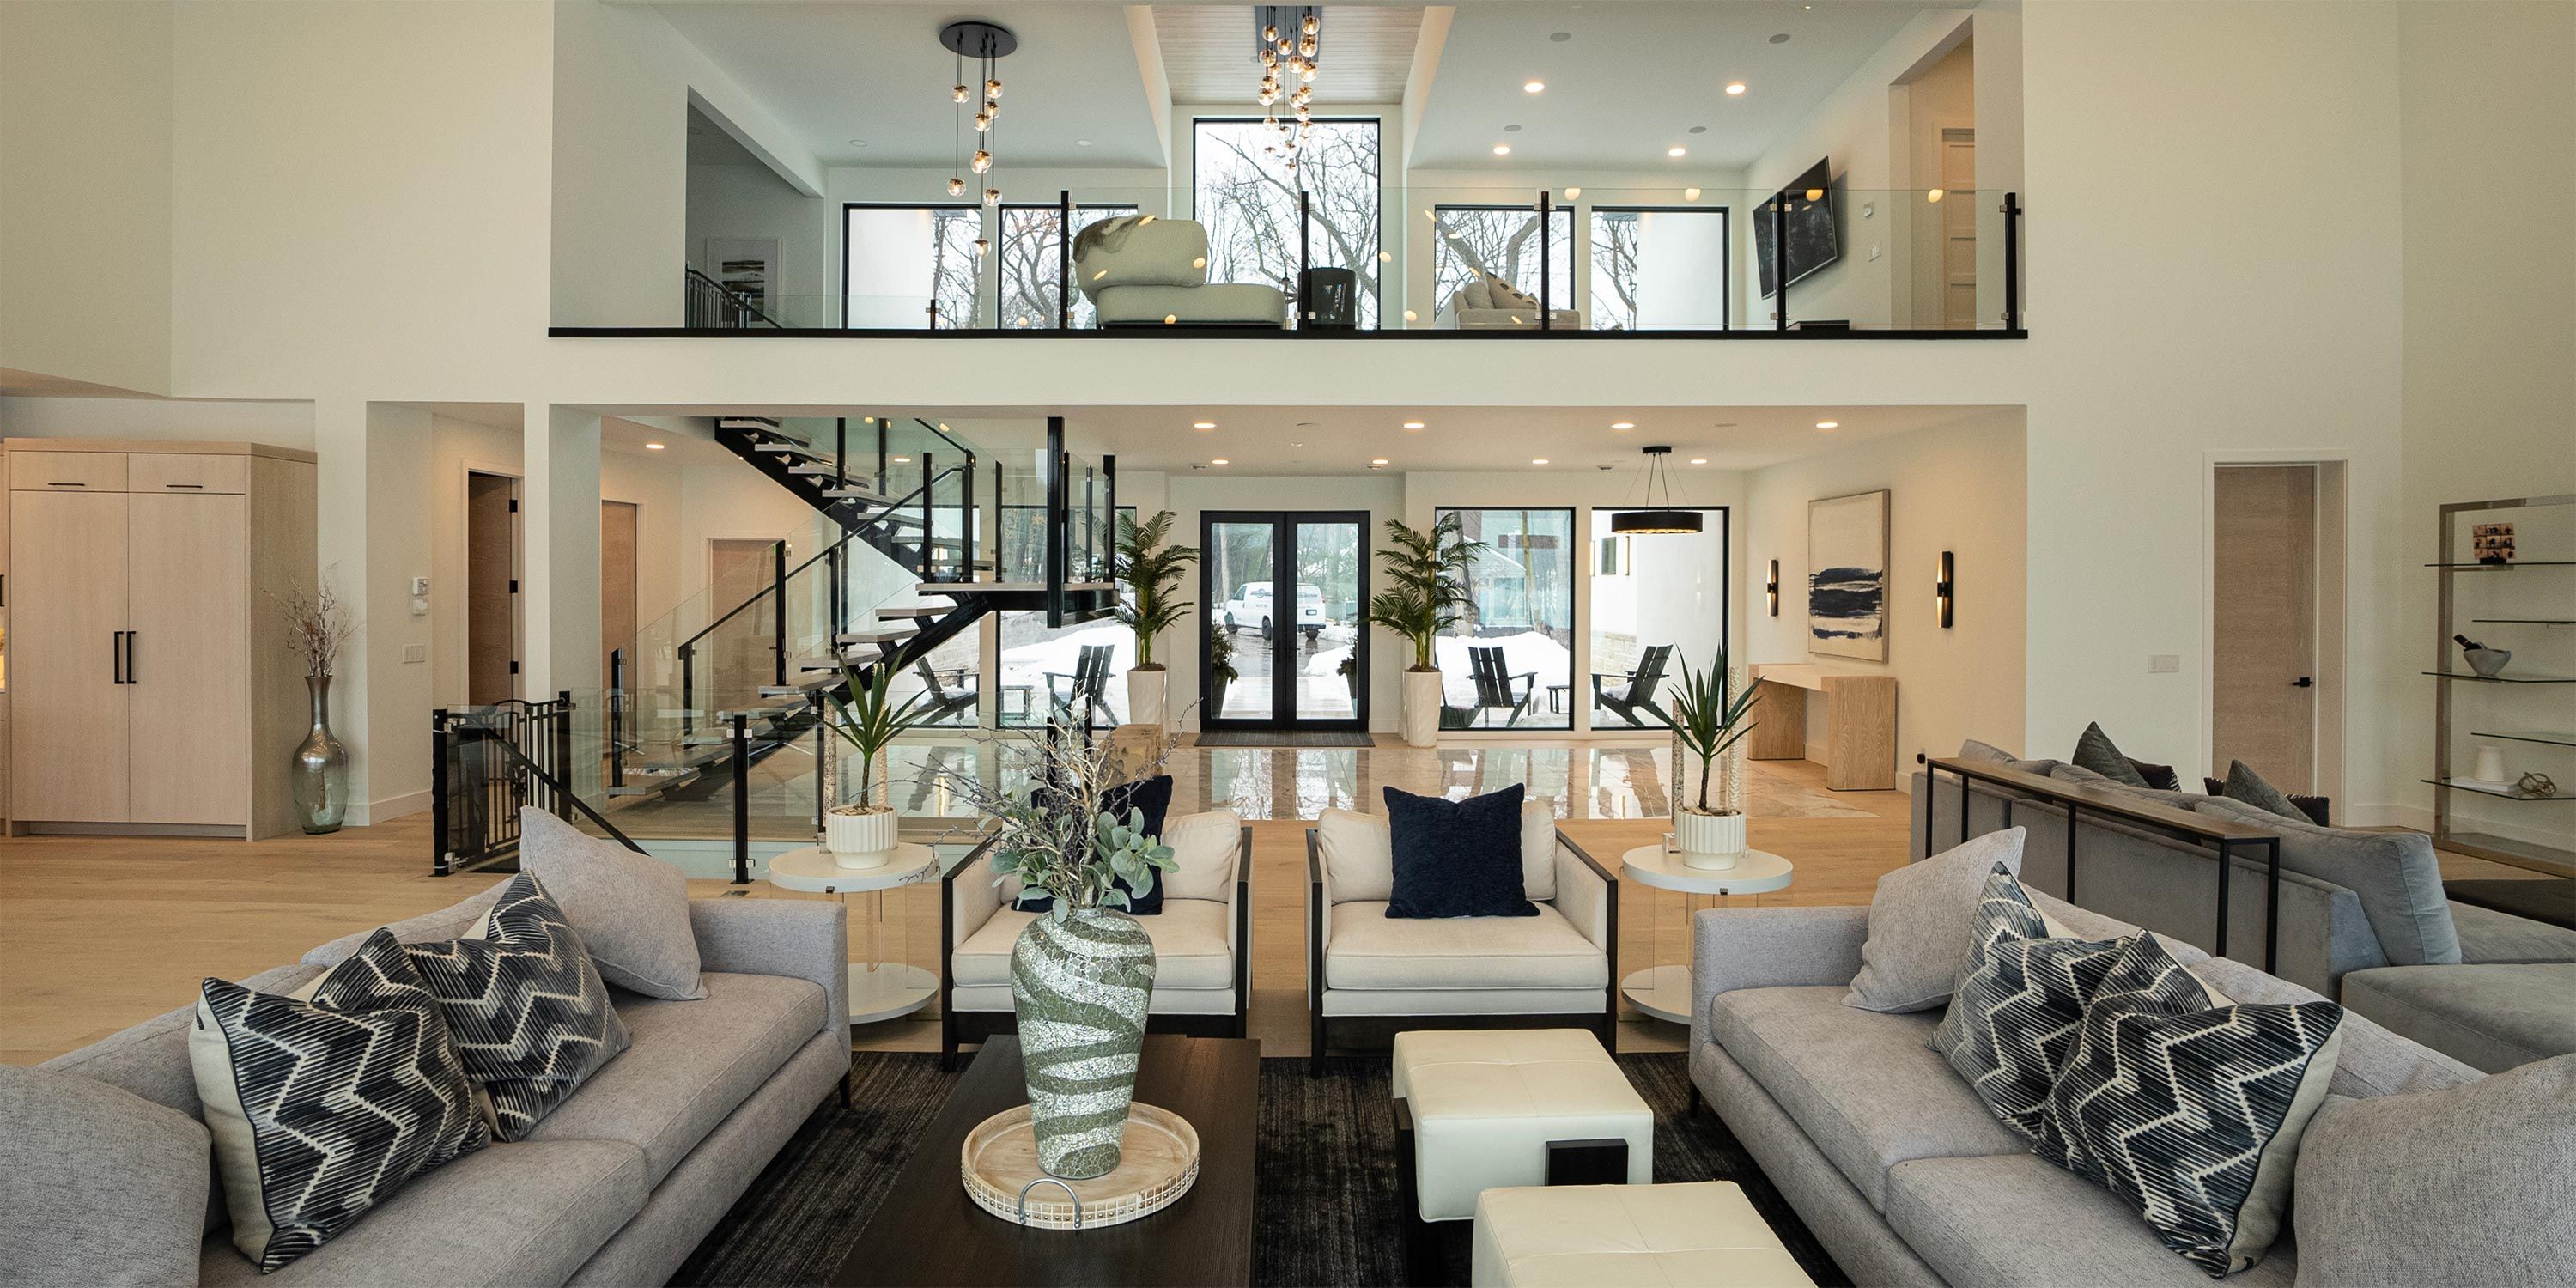 A spacious living area with a mezzanine, large windows, contemporary furnishings, and a central staircase with glass railings.